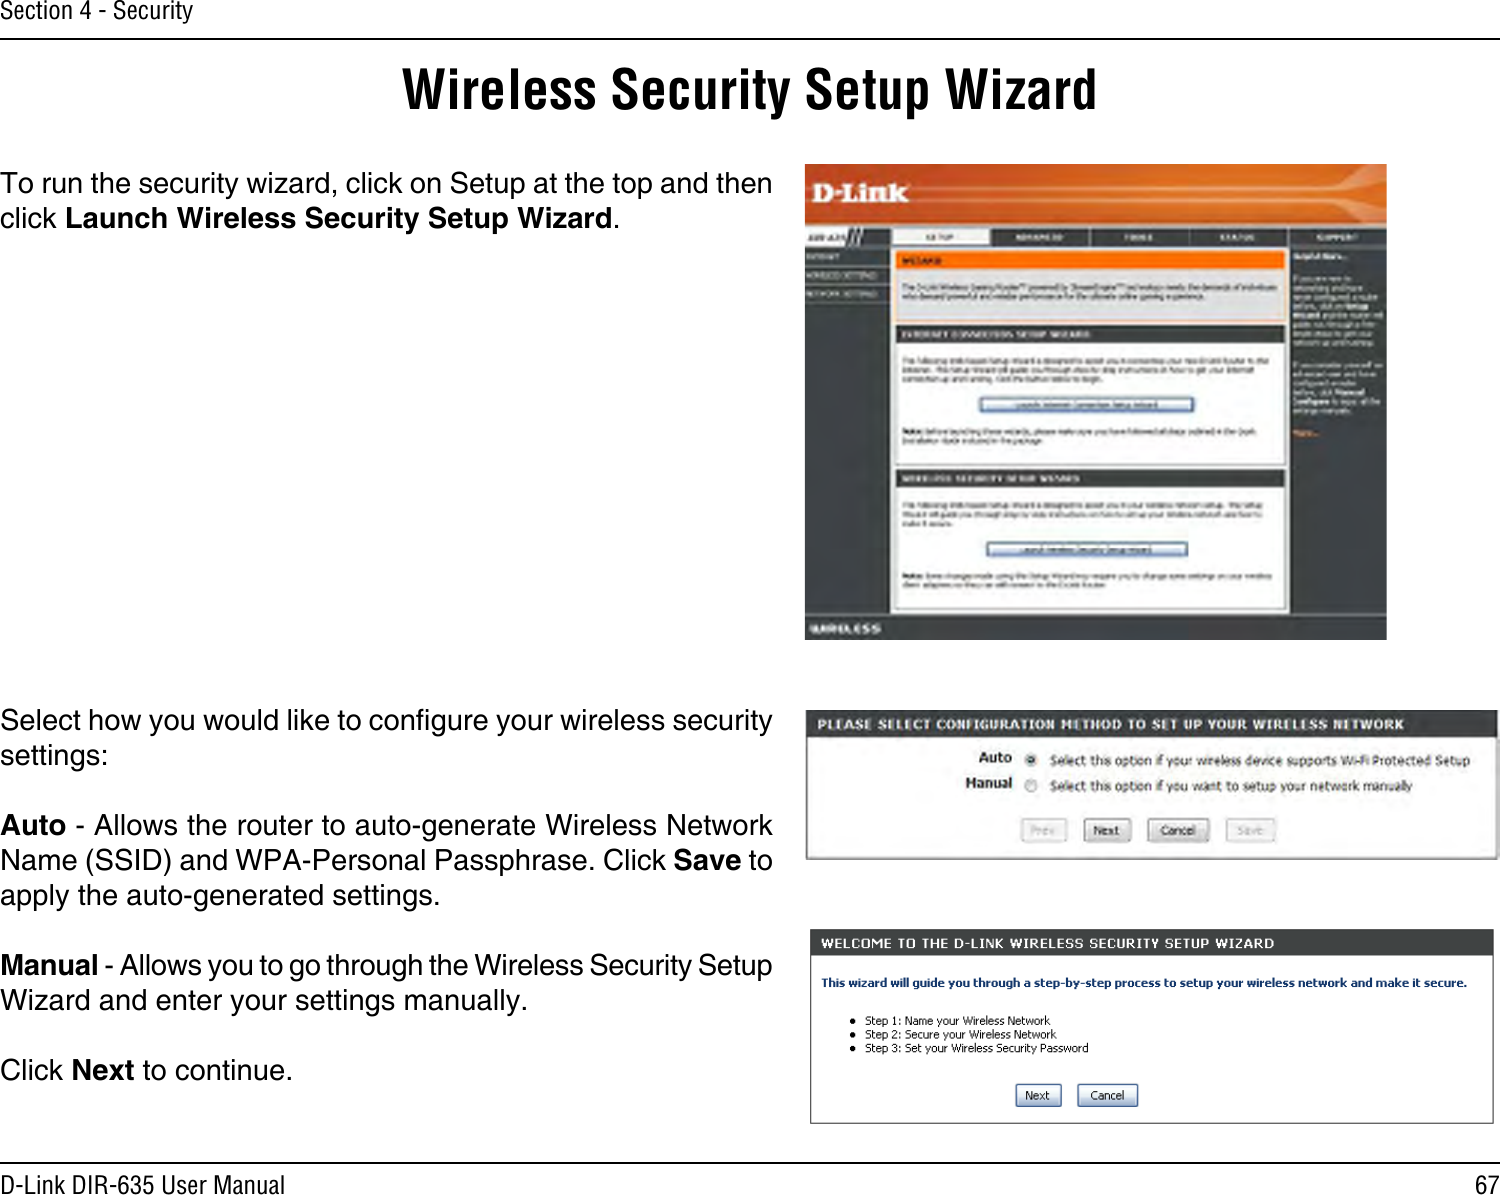 67D-Link DIR-635 User ManualSection 4 - SecurityWireless Security Setup WizardTo run the security wizard, click on Setup at the top and then click Launch Wireless Security Setup Wizard.Select how you would like to congure your wireless security settings:Auto - Allows the router to auto-generate Wireless Network Name (SSID) and WPA-Personal Passphrase. Click Save to apply the auto-generated settings.Manual - Allows you to go through the Wireless Security Setup Wizard and enter your settings manually.Click Next to continue.